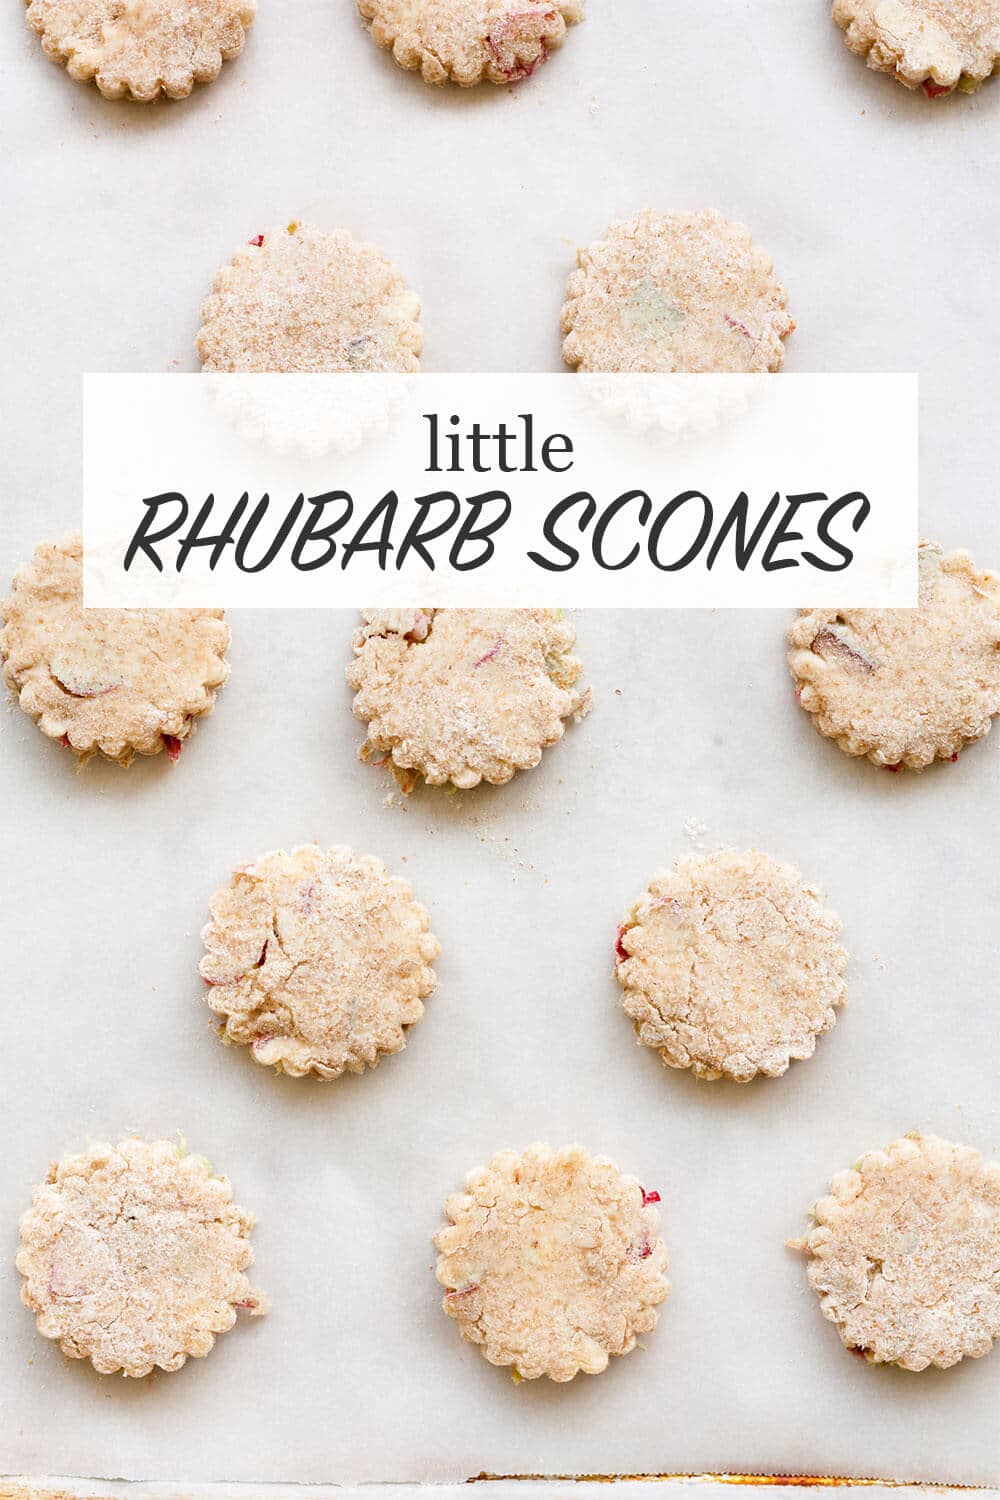 Mini rhubarb scones with crinkle edges before baking on parchment paper lined baking sheet